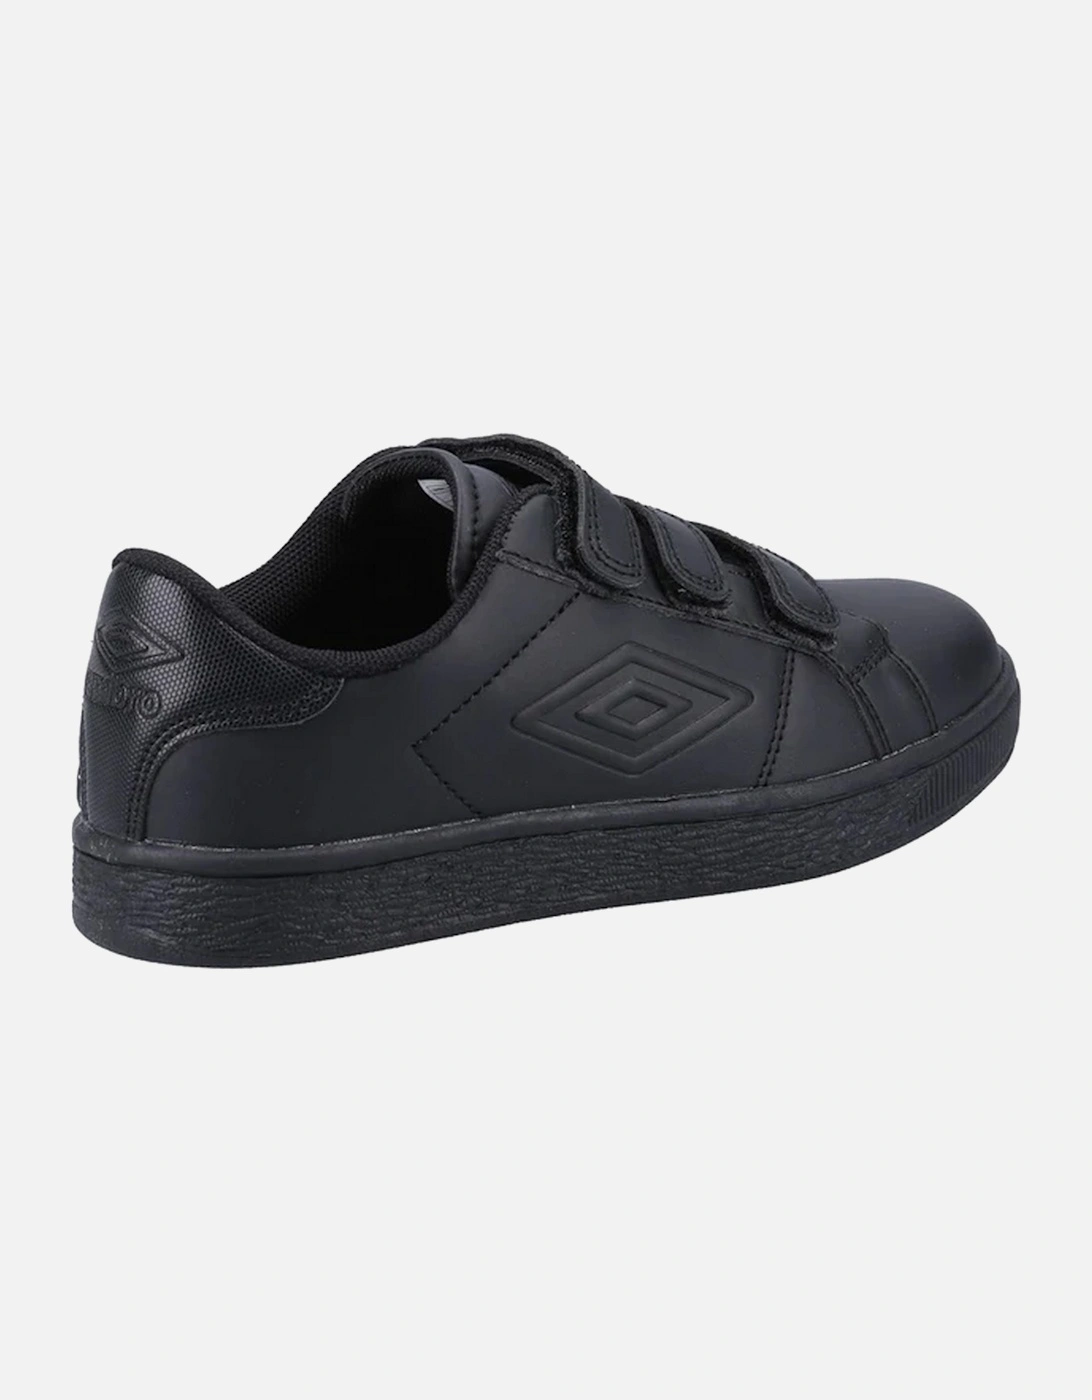 Boys Medway V Jnr Touch Fastening School Shoes